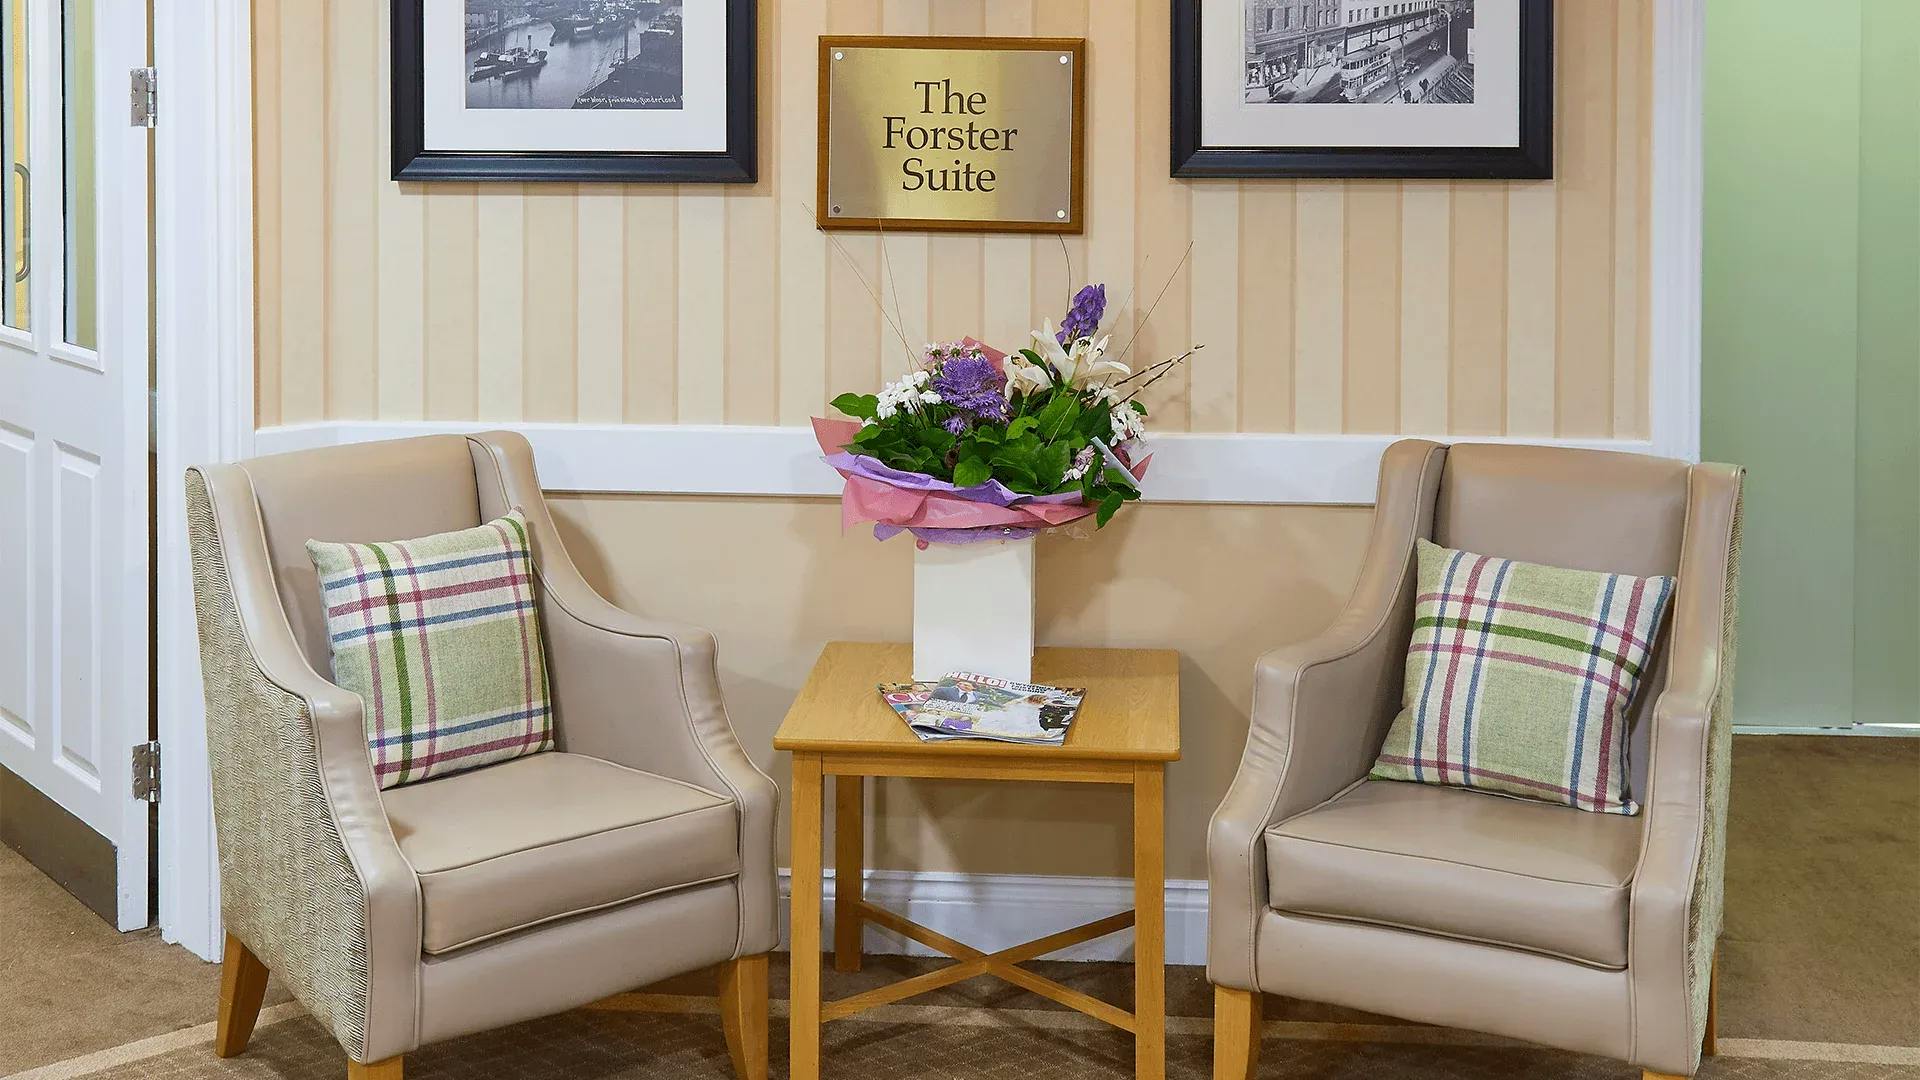 The lounge area at Highcliffe Care Home in Sunderland, Tyne and Wear